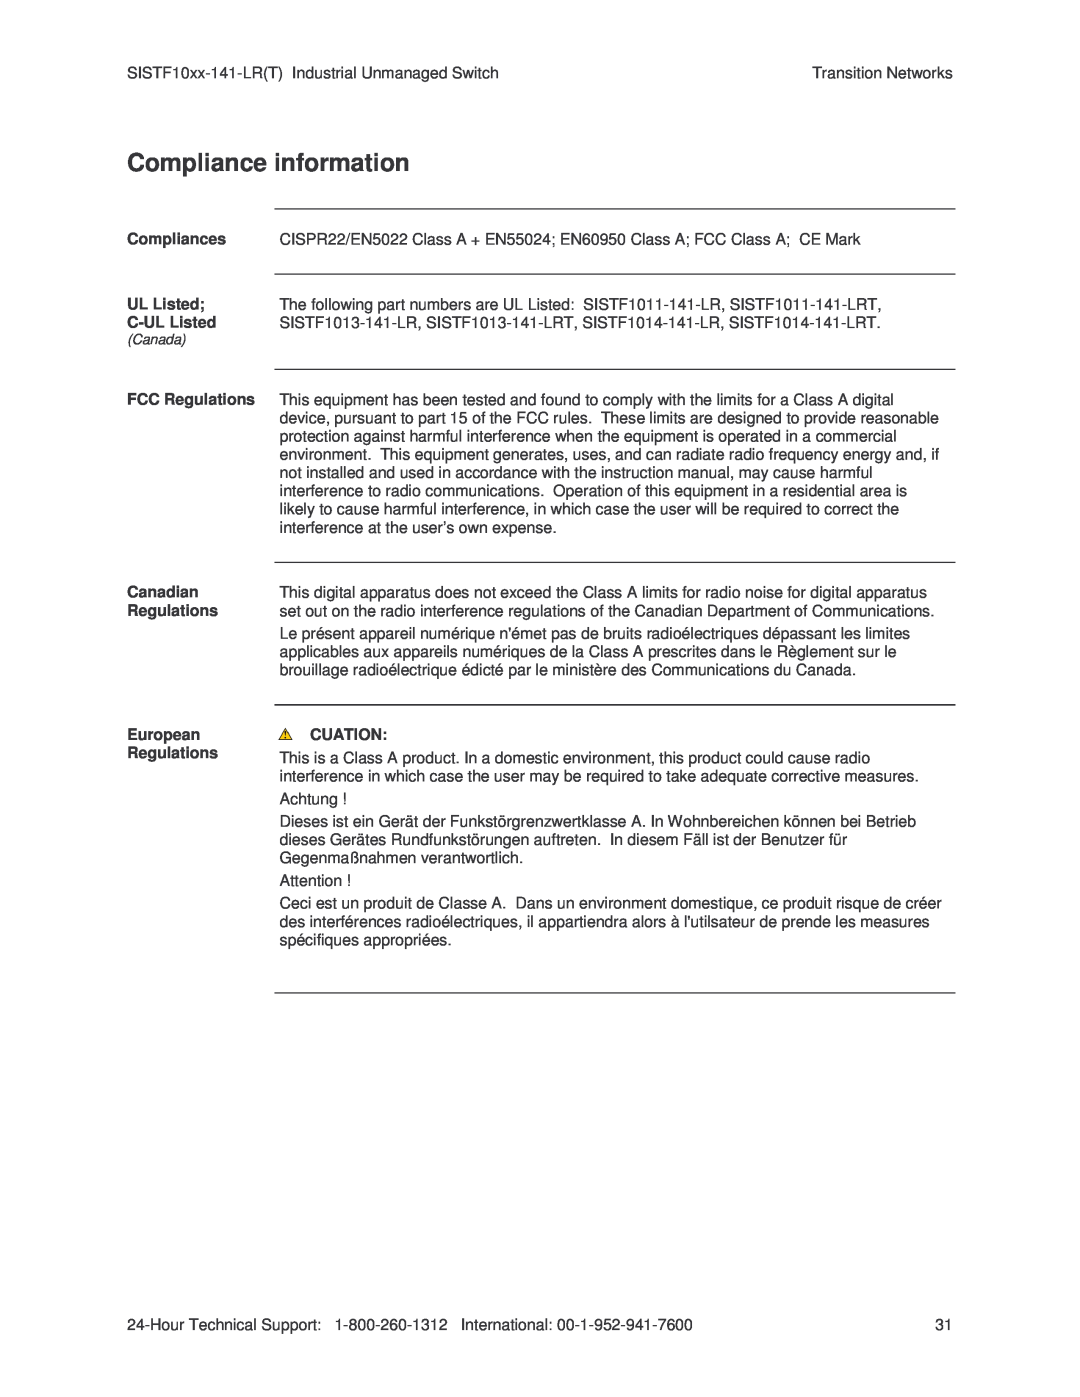 Transition Networks SISTF10xx-141-LR(T) installation manual Compliance information 